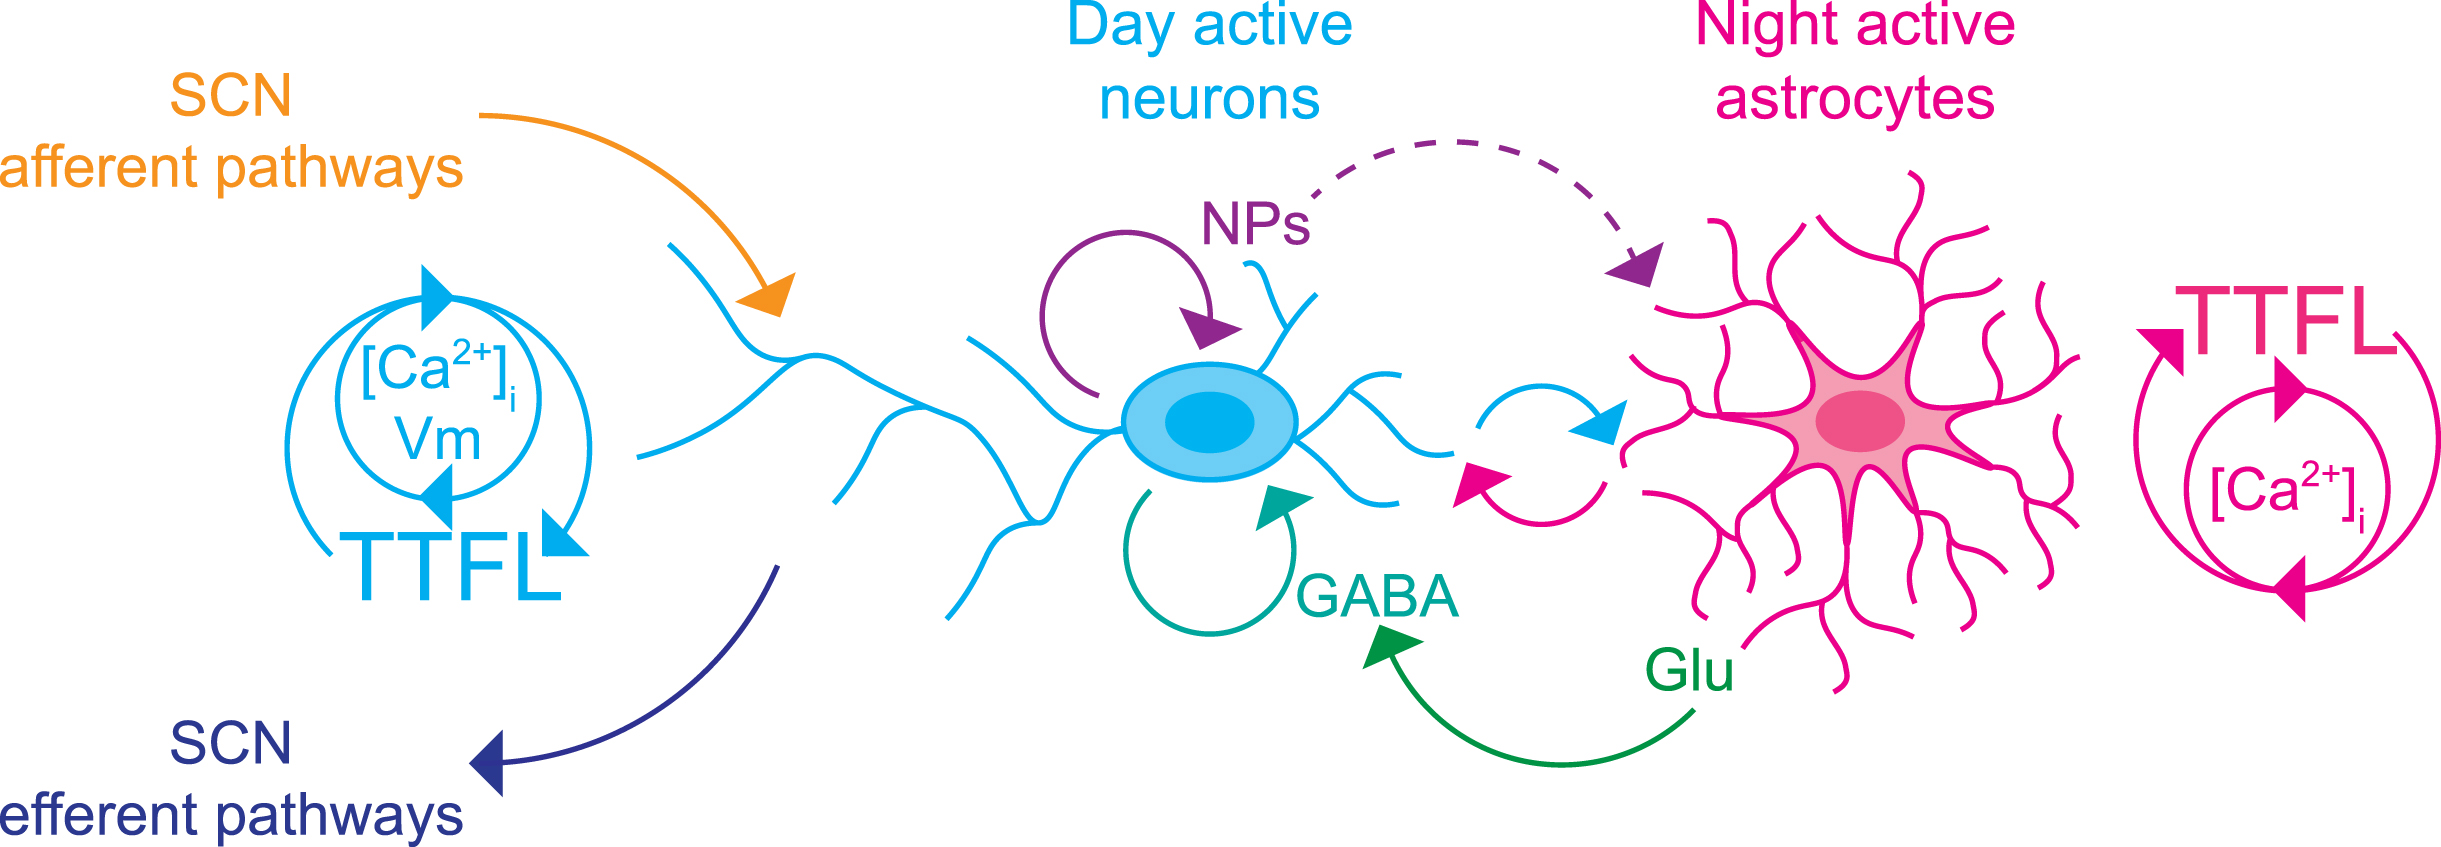 Interactions between neurons and astrocytes drive circadian time-keeping in the SCN. Both neurons (blue) and astrocytes (magenta) contain a TTFL but their cellular activity rhythms, as evidenced by rhythms of calcium ([Ca2 +]i), are oppositely phased (neurons day-, astrocytes night-active). Neuropeptides (NPs) and GABA synchronize the SCN neuronal network, and astrocytes signal via glutamate (Glu) (and likely other astrocyte-derived signals, magenta arrow) to regulate the neuronal rhythms. Equally, neuronal cues (yet to be identified, blue, and possibly including neuropeptides, broken line) signal circadian information to astrocytes. This reciprocal communication enhances circuit-level time-keeping. Afferent signals onto neurons from outside the SCN determine network phase, and neuronal efferents broadcast circadian time to SCN targets in the brain.